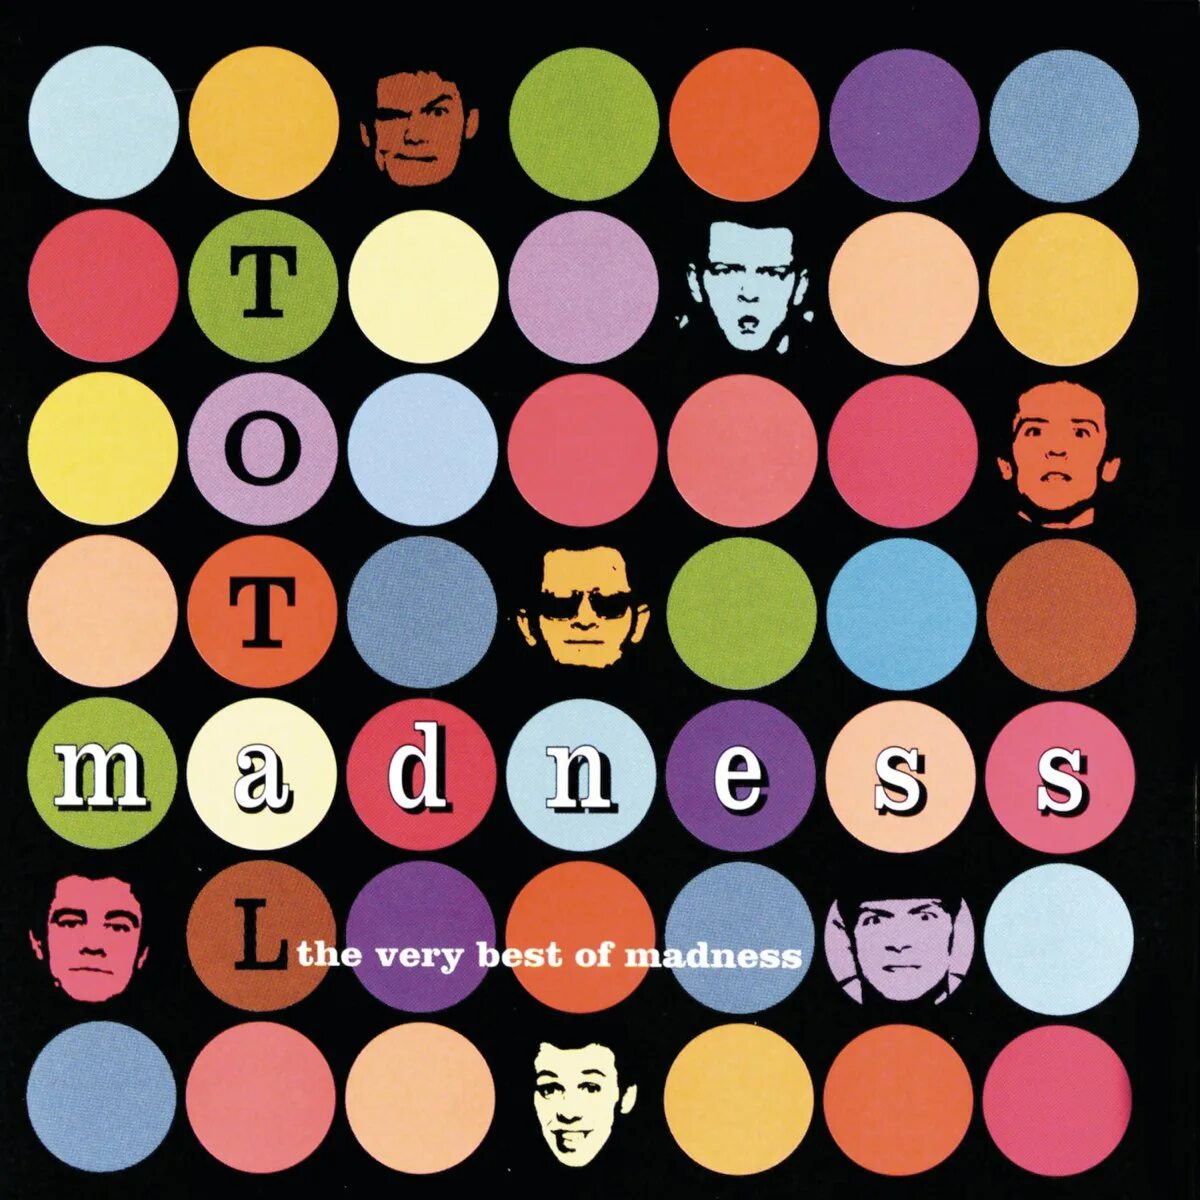 Madness the very best of Madness. Madness Full House (the very best of Madness). Madness "one Step Beyond". Madness — the very best of (4lp). Virus j total madness